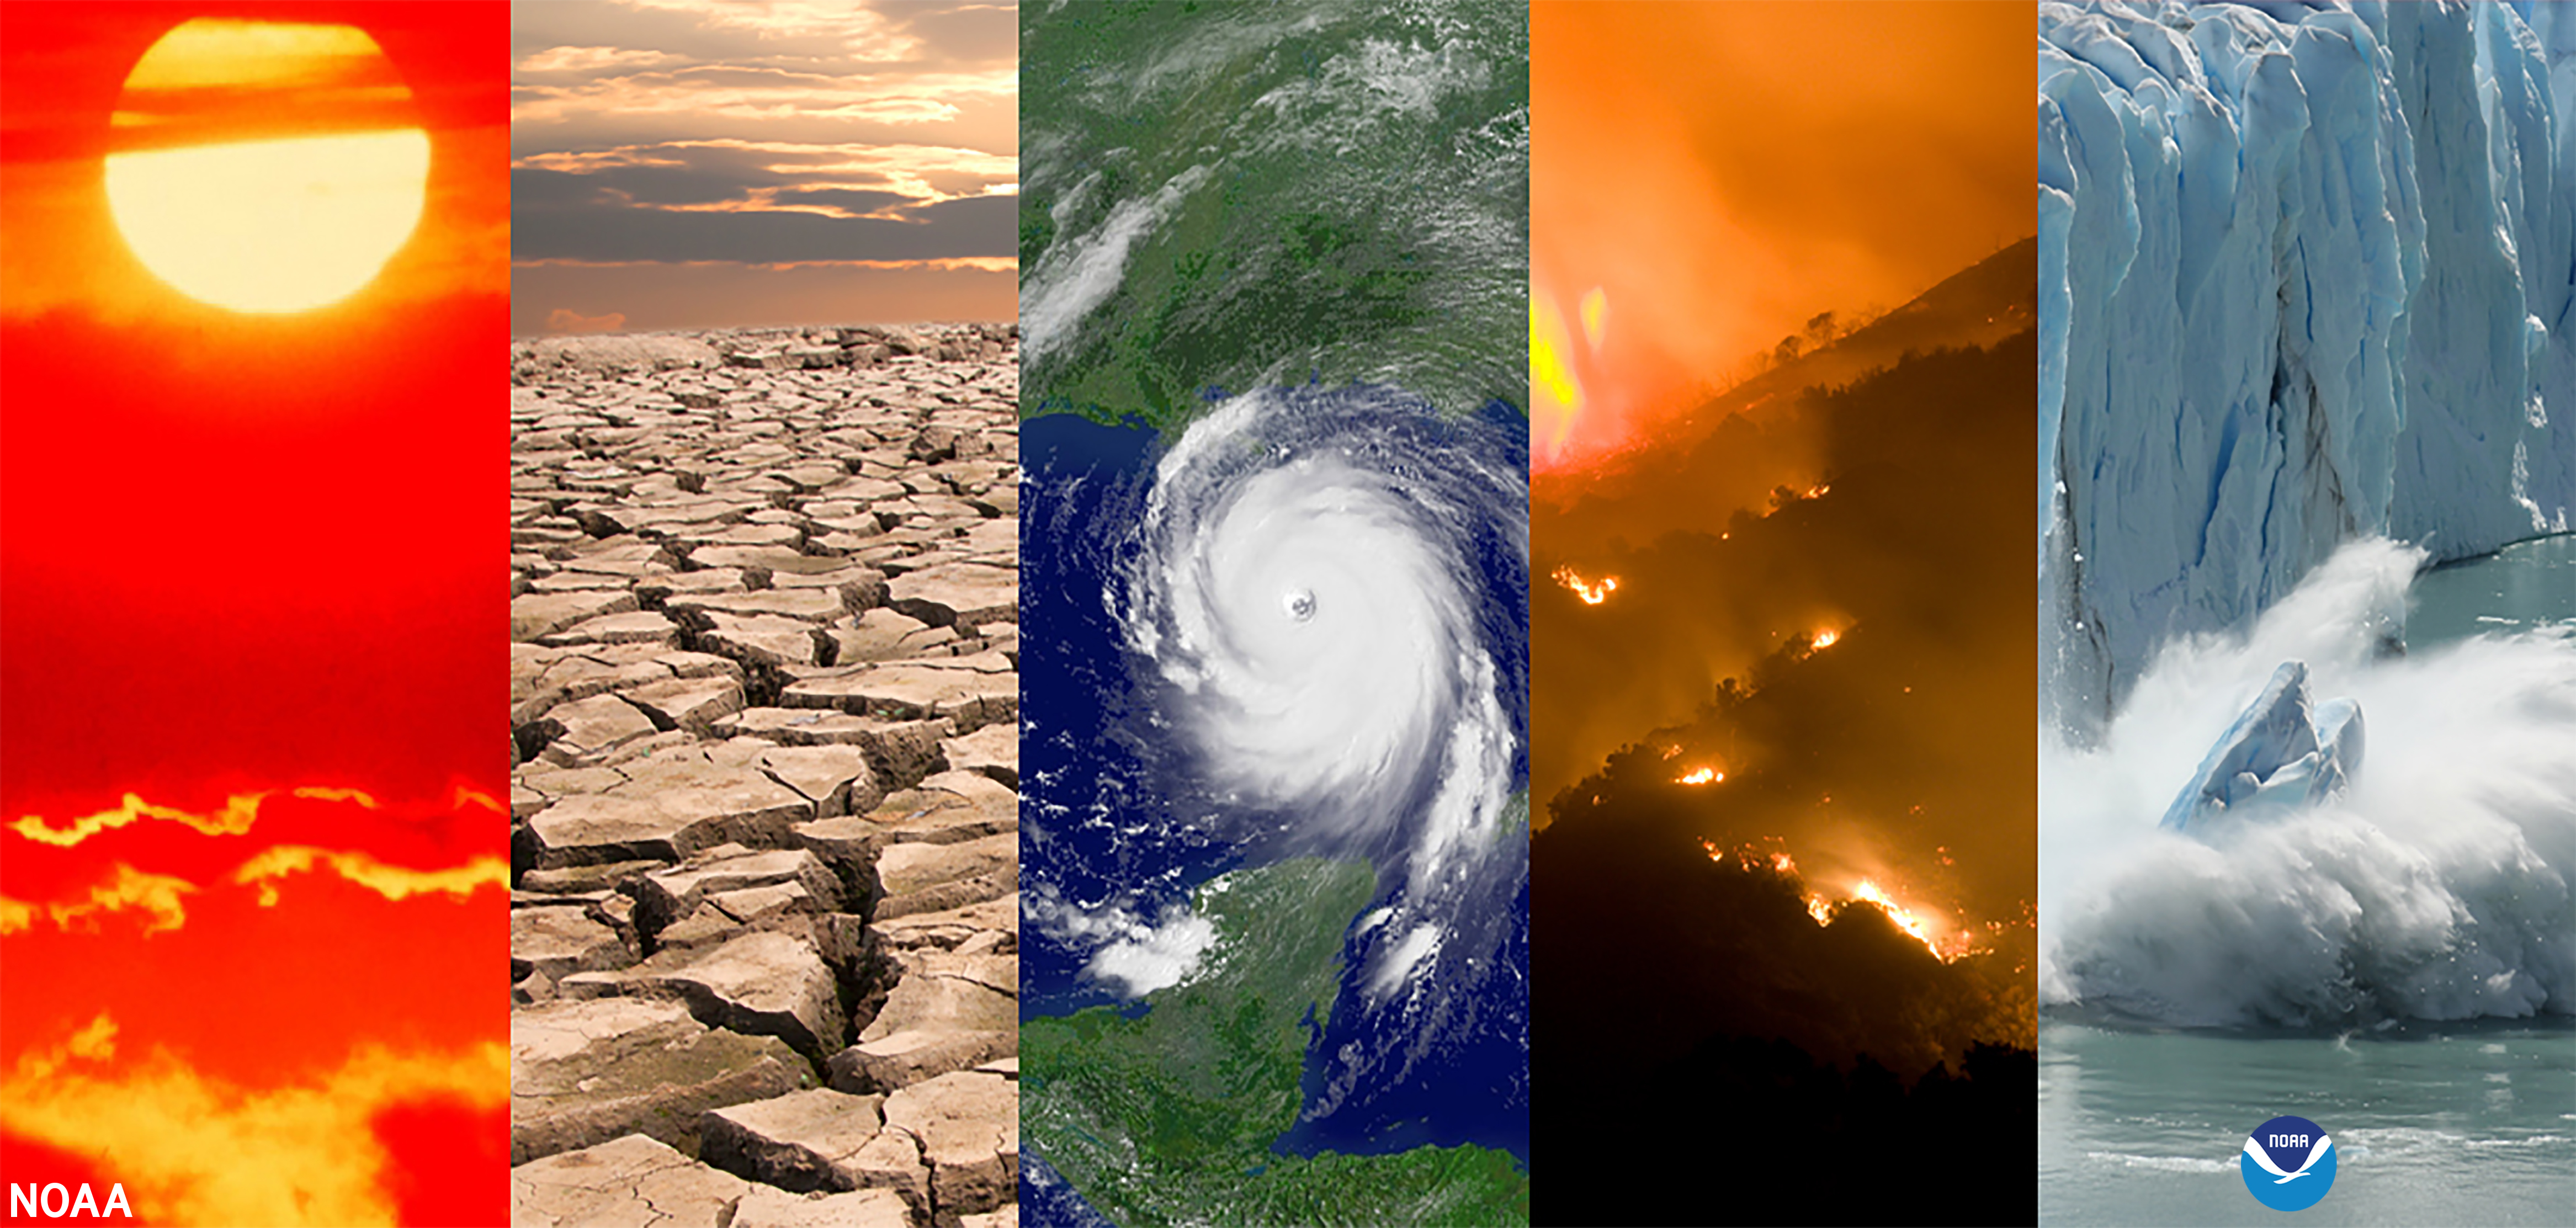 Why Are So Many Apocalyptic Natural Disasters Suddenly Happening All Over The Globe?